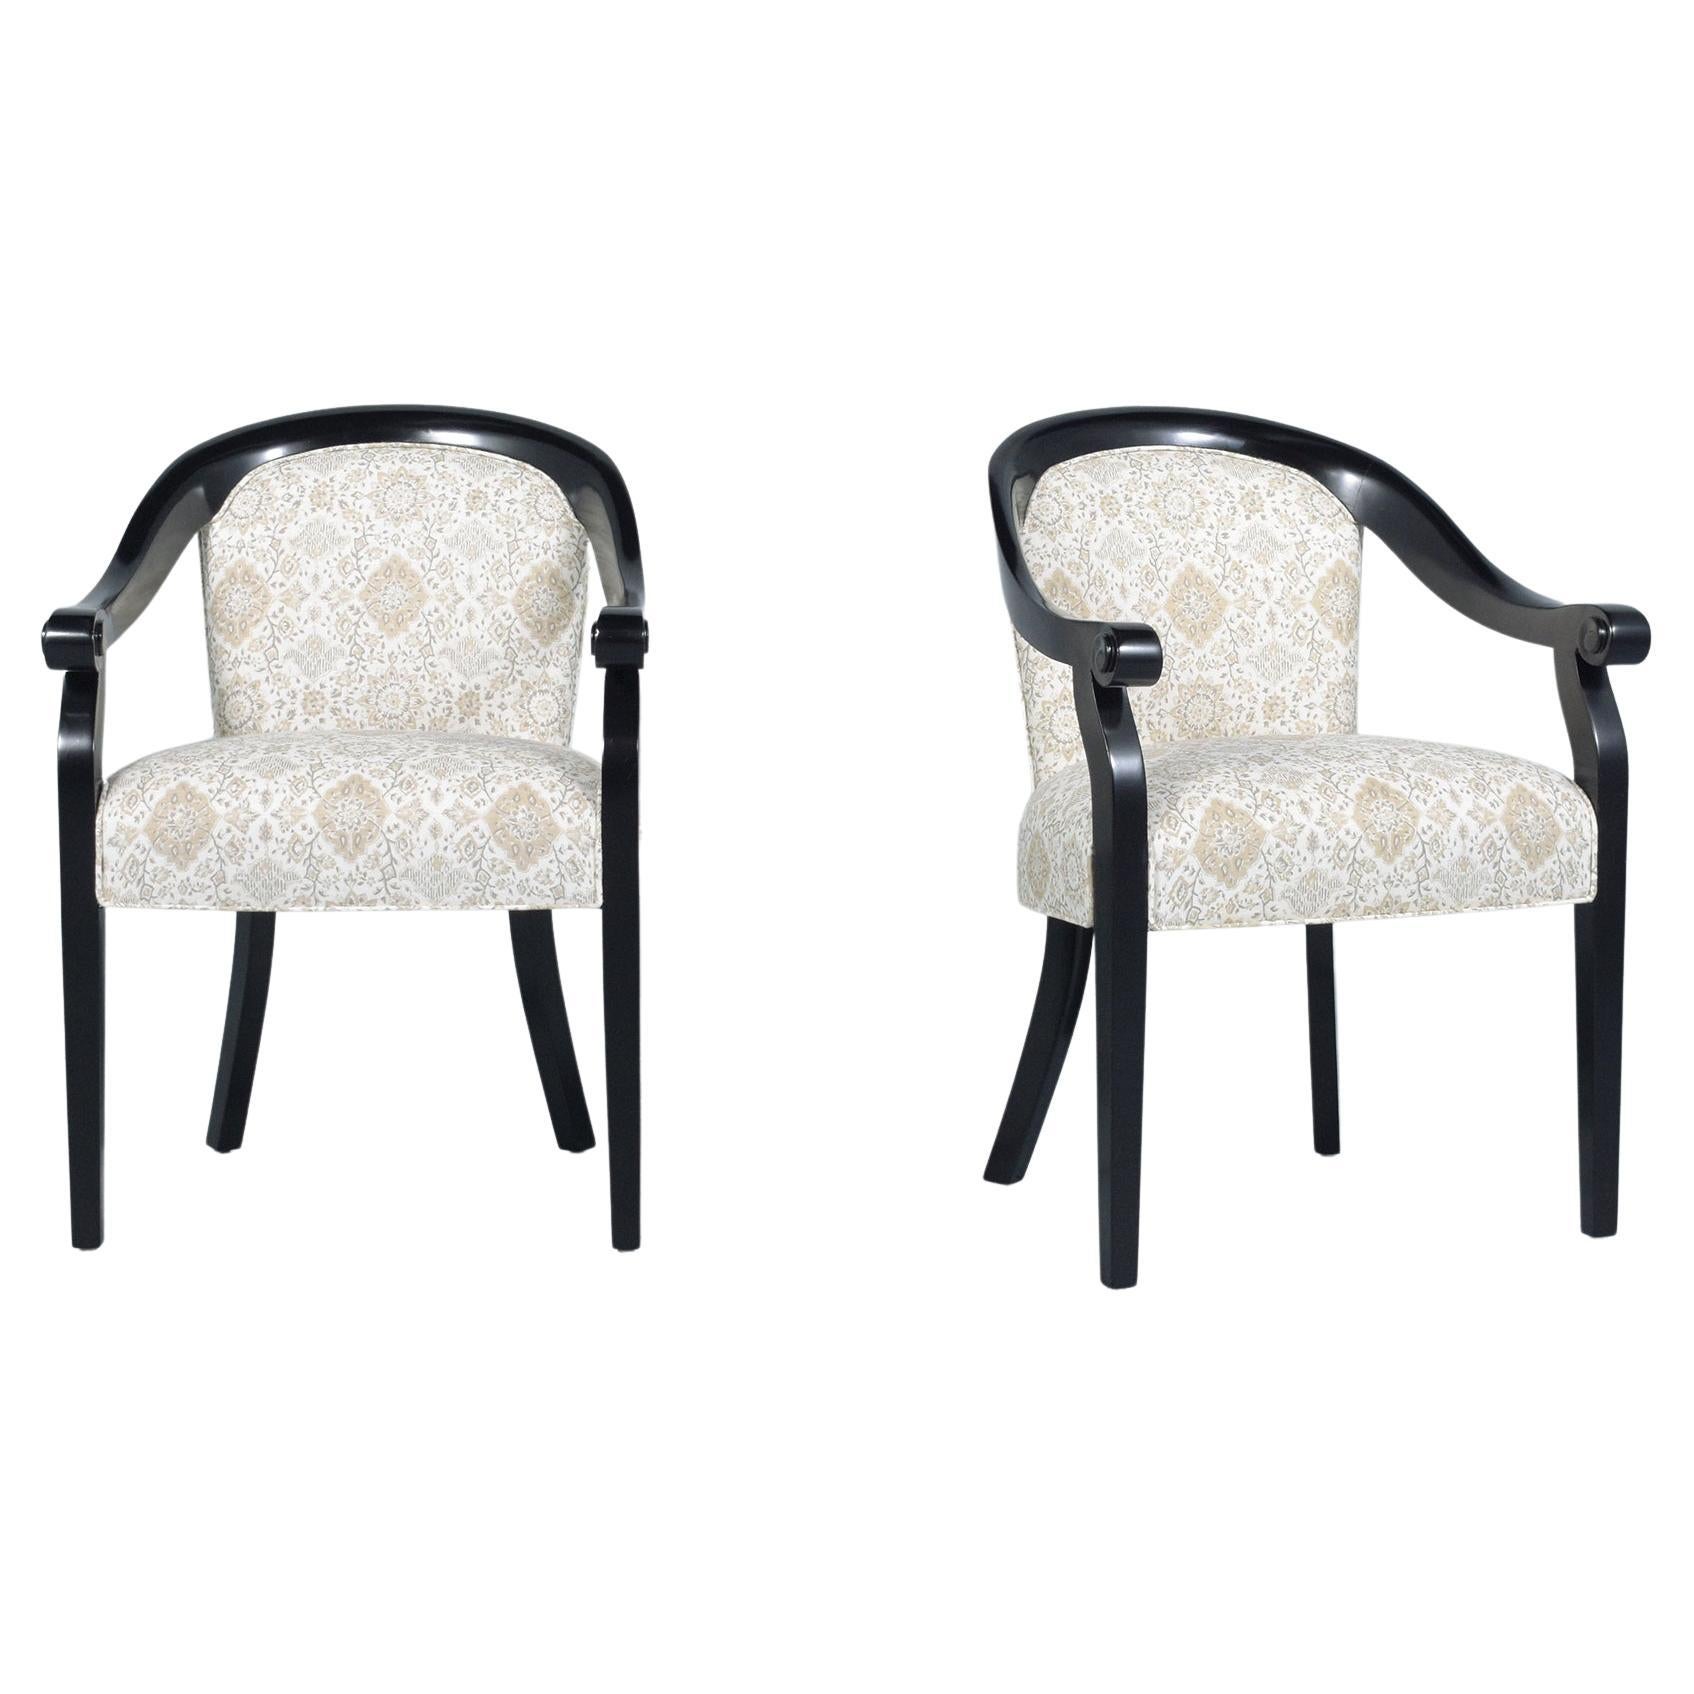 1960s Hickory Modern Black Lacquered Armchairs with Patterned Linen Upholstery